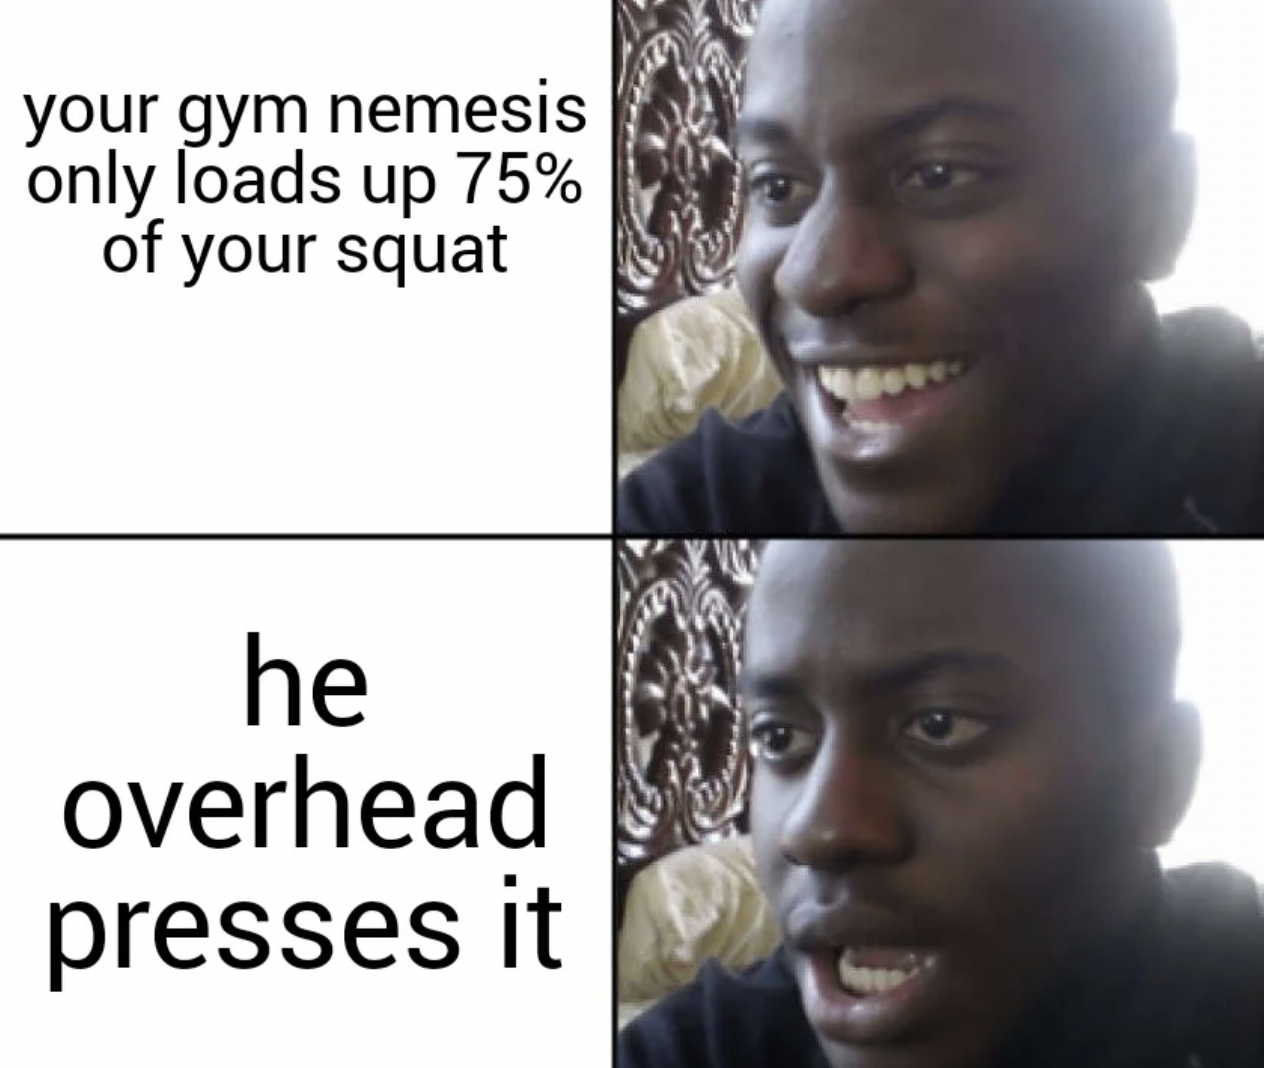 your gym nemesis only loads up 75% of your squat he overhead presses it